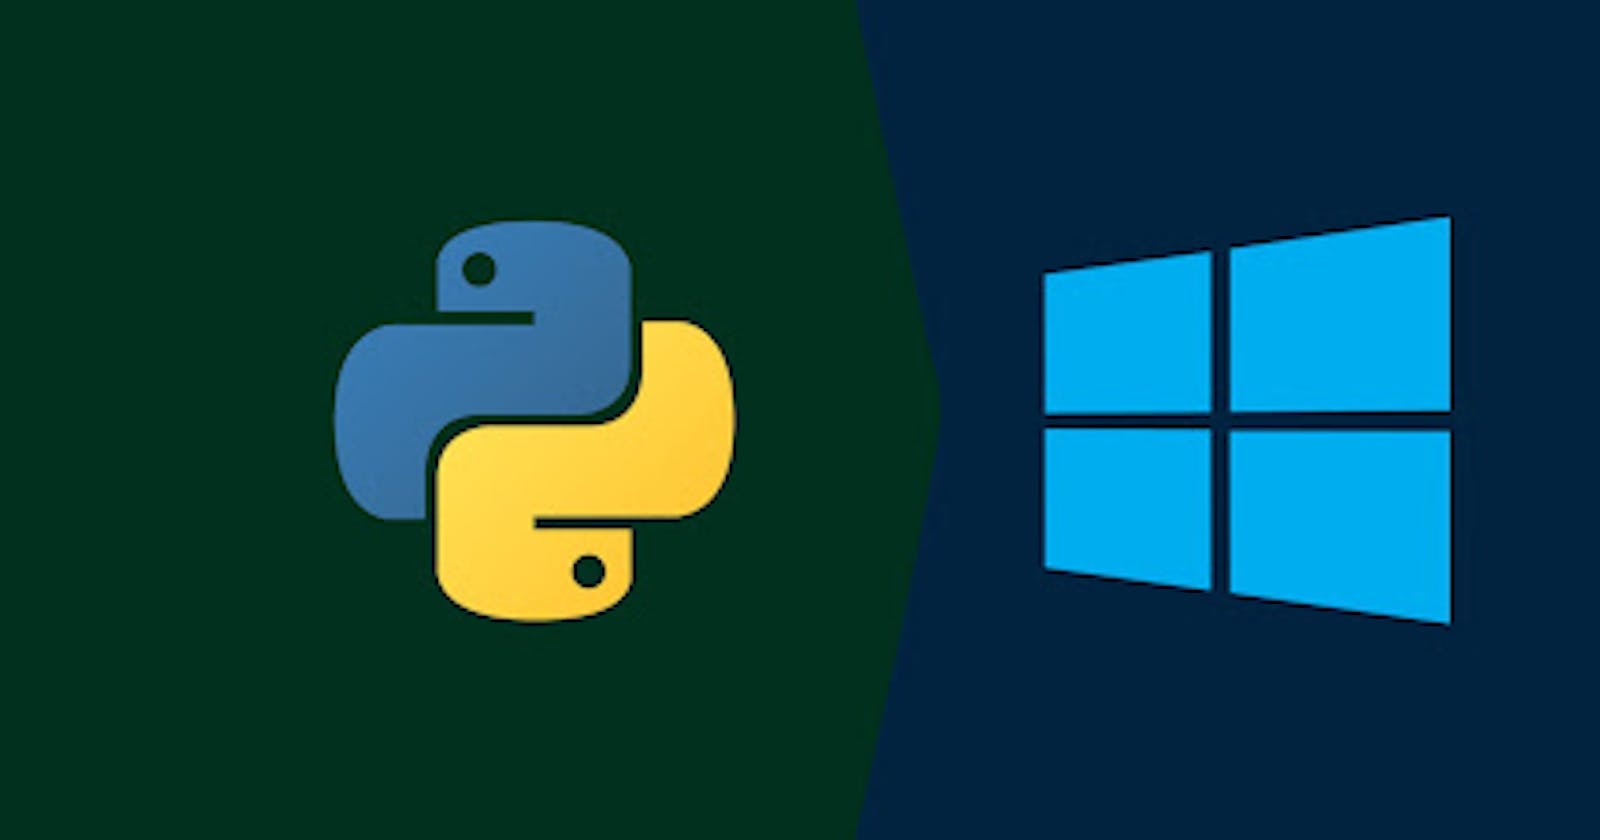 How to Install and Run Python Programs on Windows With Microsoft pip